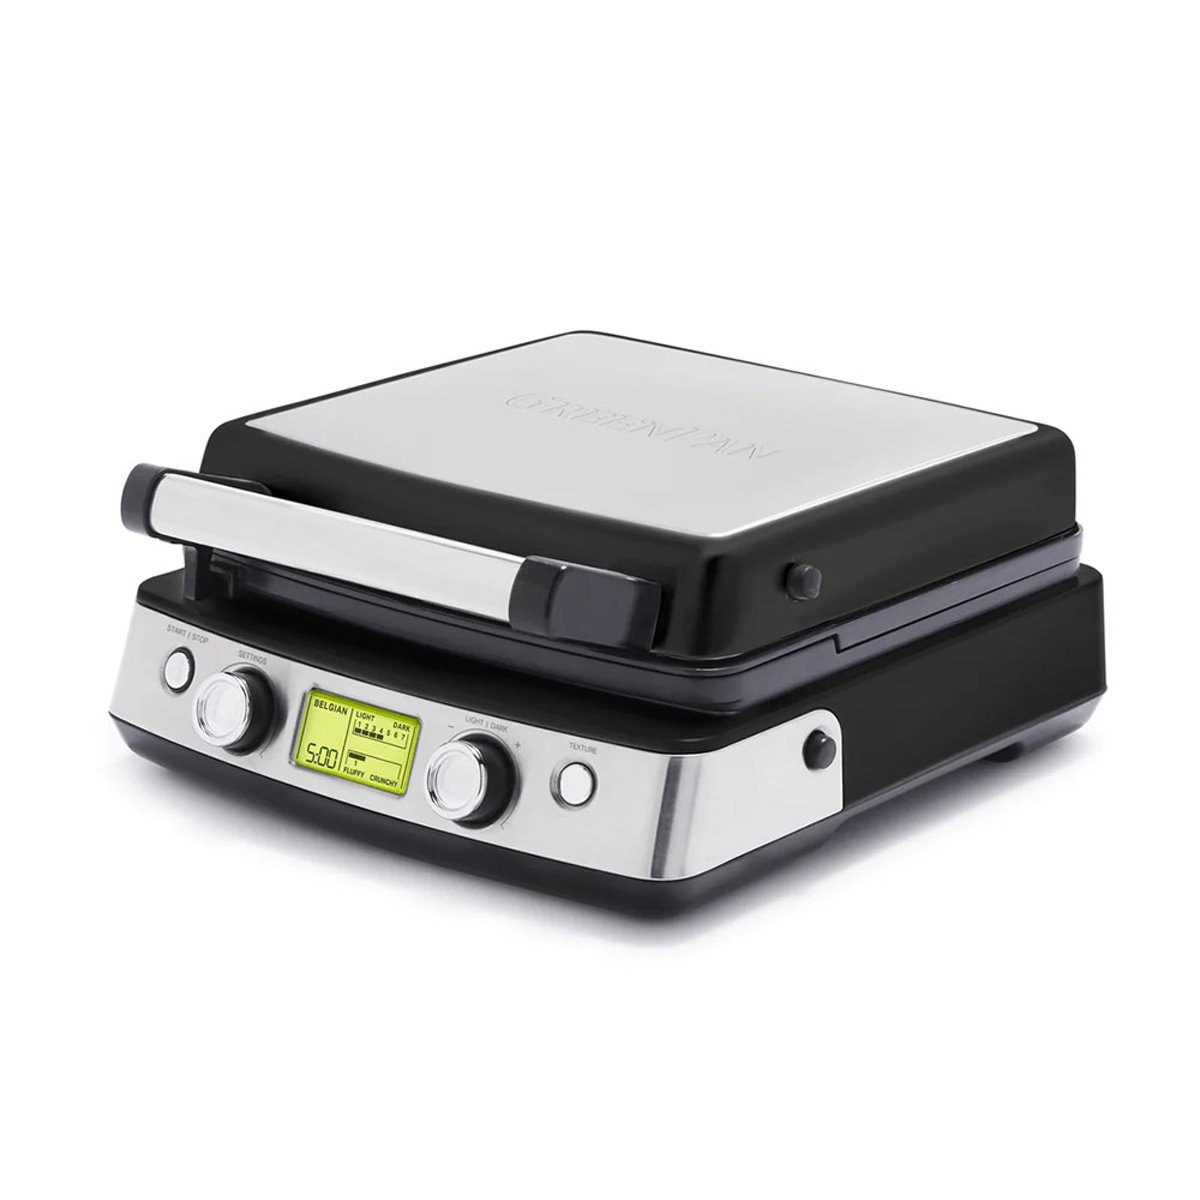 Elite Ceramic Nonstick 2-Square Waffle Maker, Premiere Stainless Stee